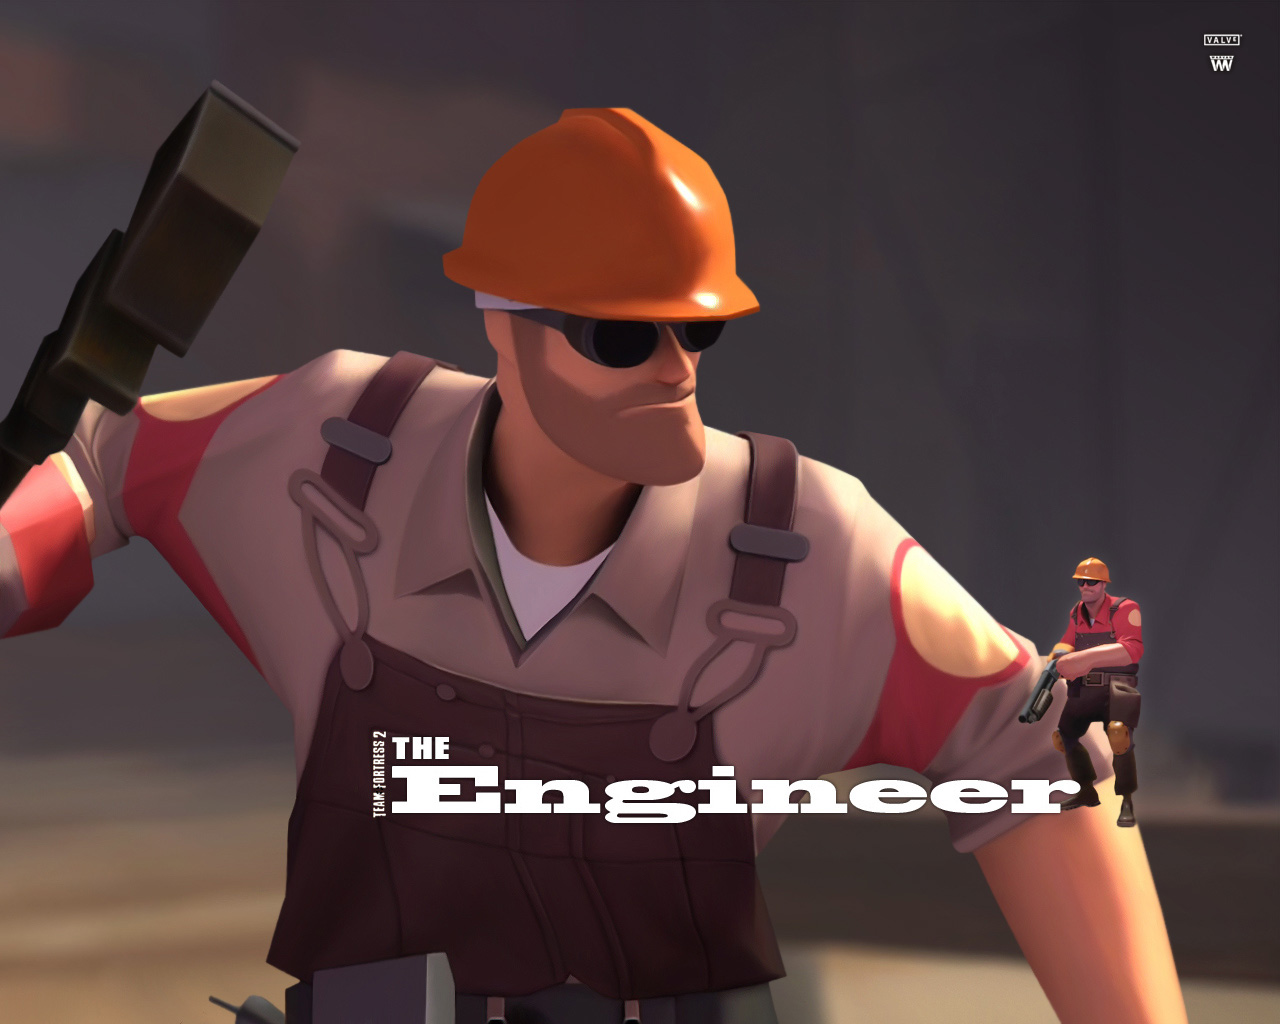 Engineer tf2 team fortress 2 video games wallpaper - (#168409 ...